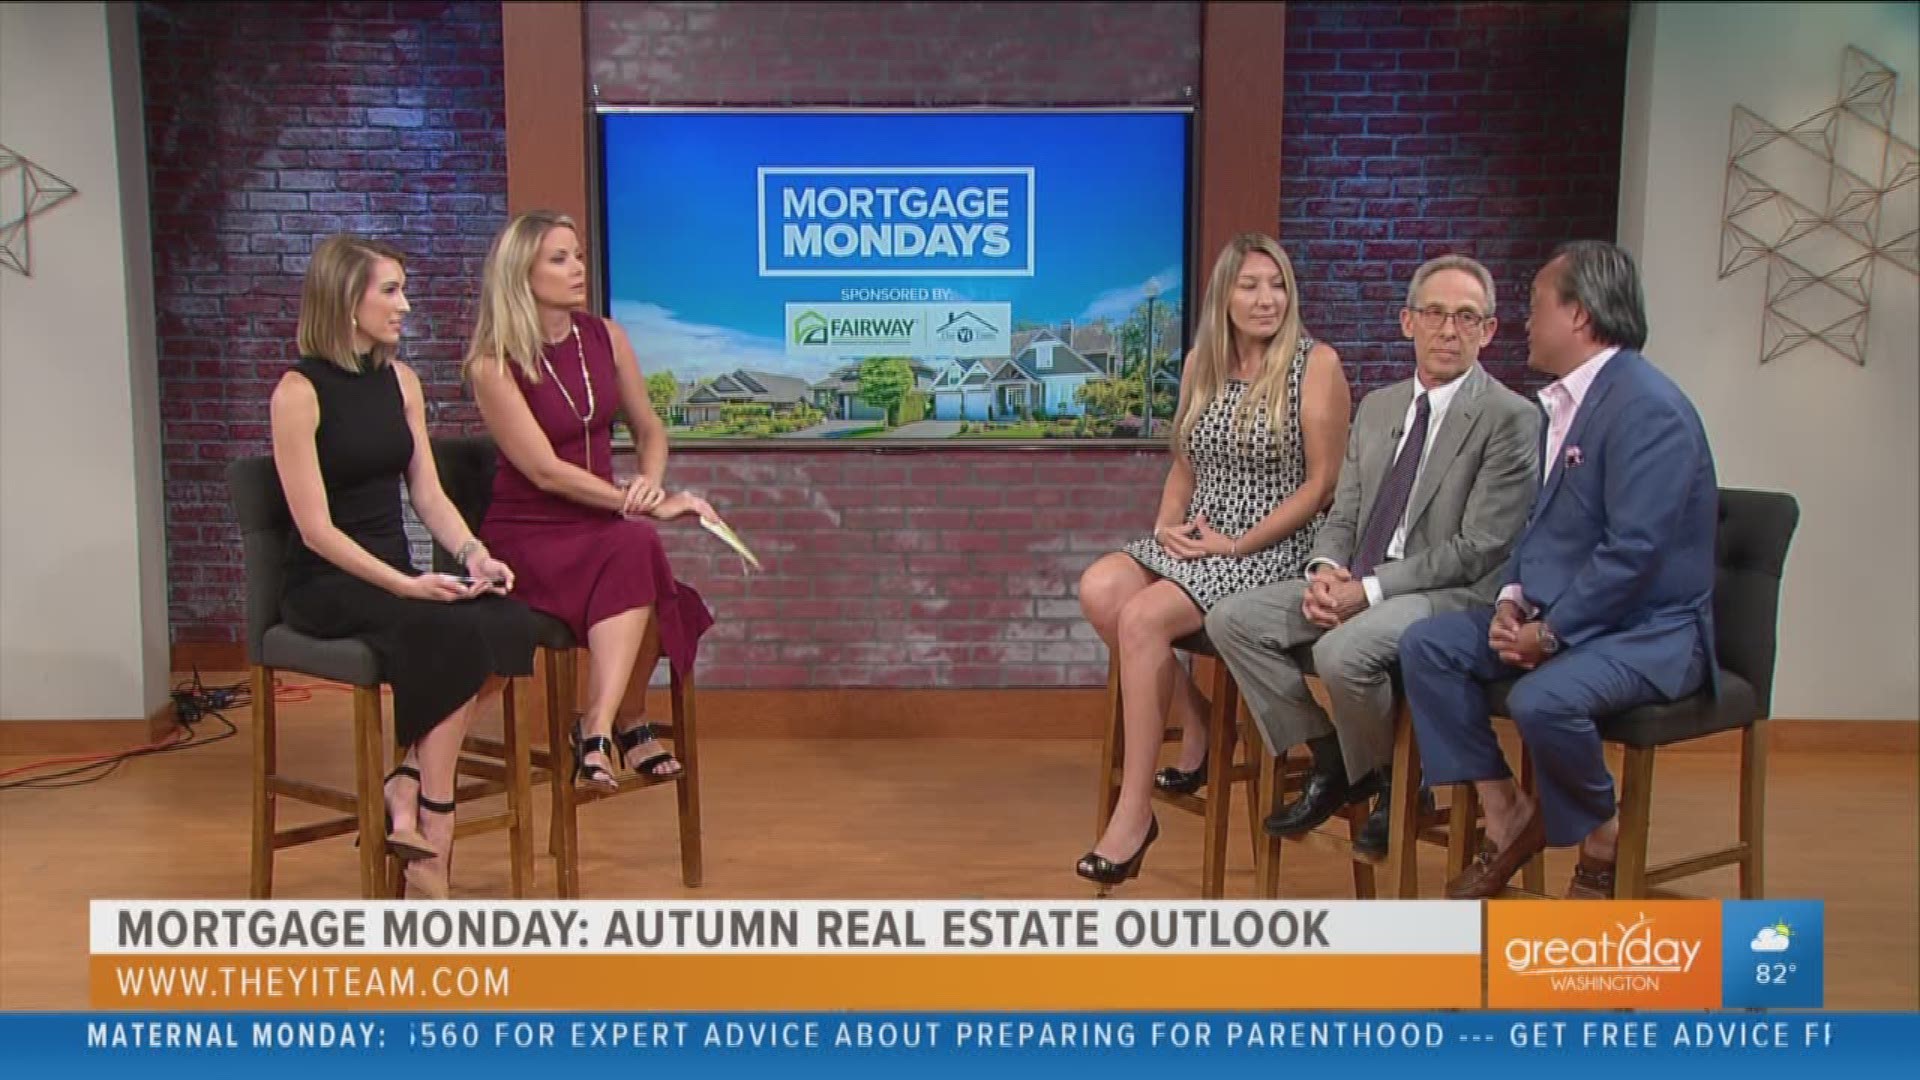 The season is changing soon but according to our real estate experts the market will remain hot!  Chong Yi of the Yi Team stops by with Ana Dubin and Bob Myers from the Myers Team at RE/MAX Realty Services to explain how the fall market is looking to be one of the busiest in years.  For information about home financing visit www.TheYiTeam.com.